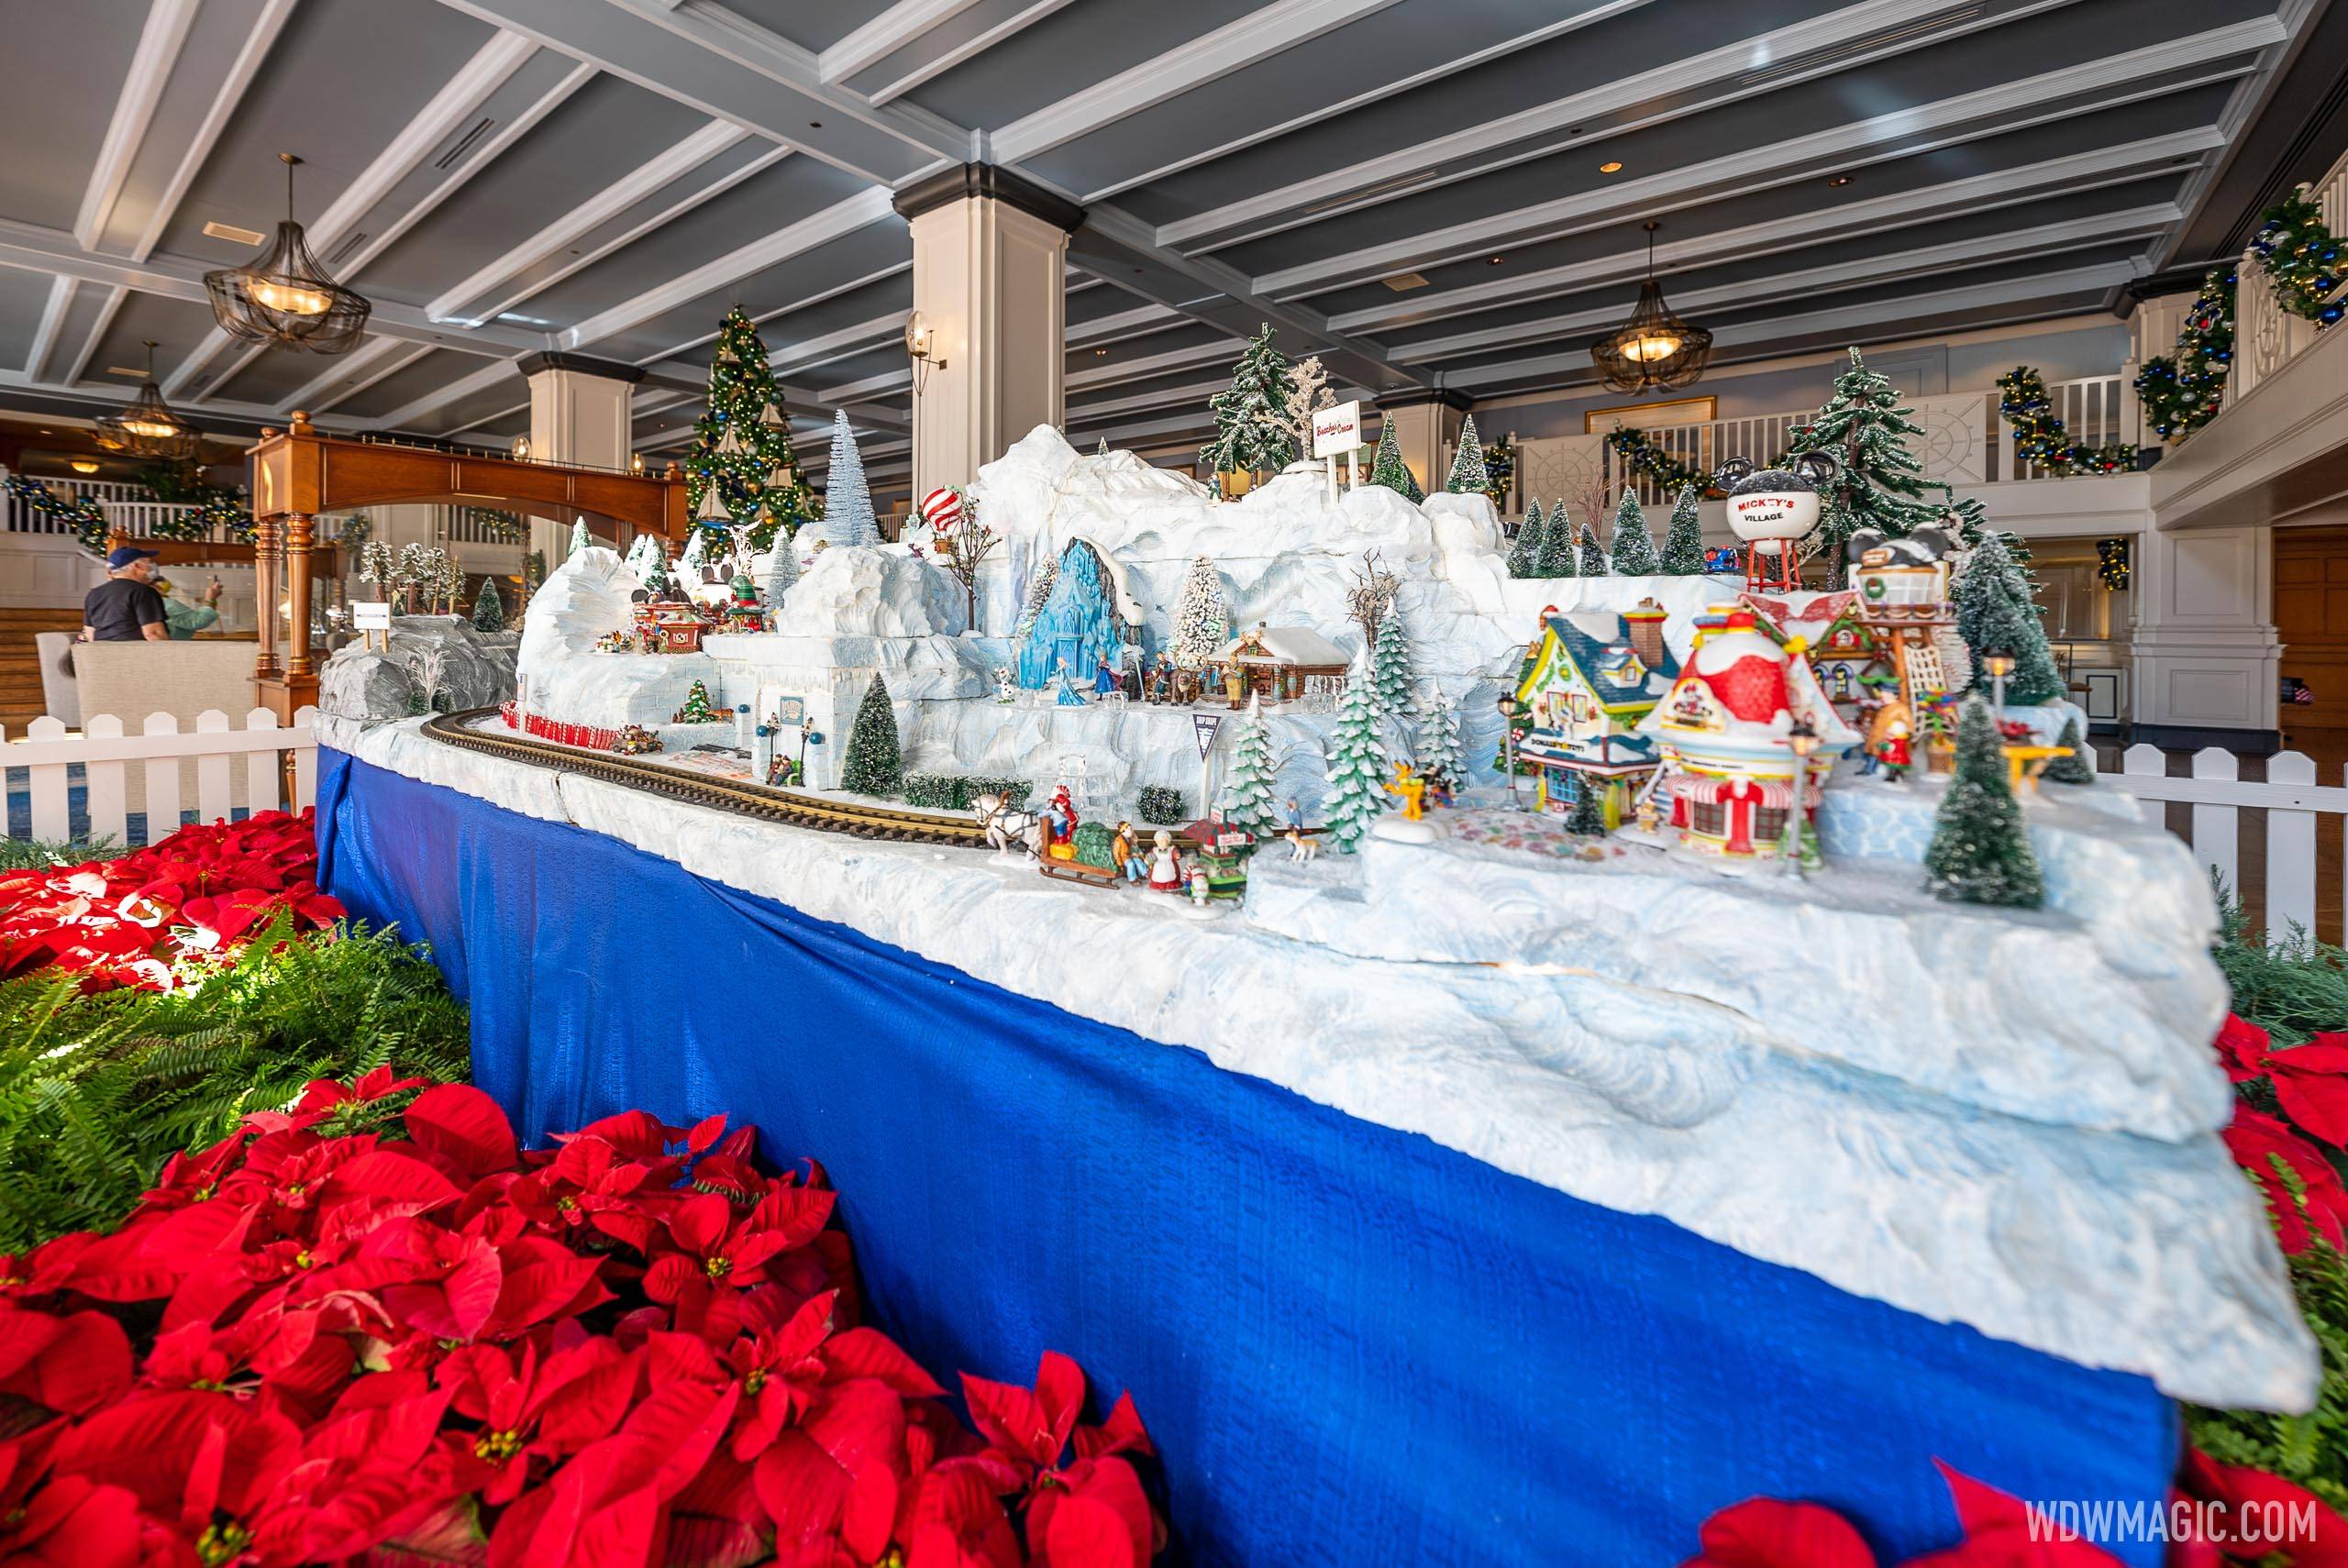 The Yacht Club Christmas village can be found in the lobby near to Ale and Compass